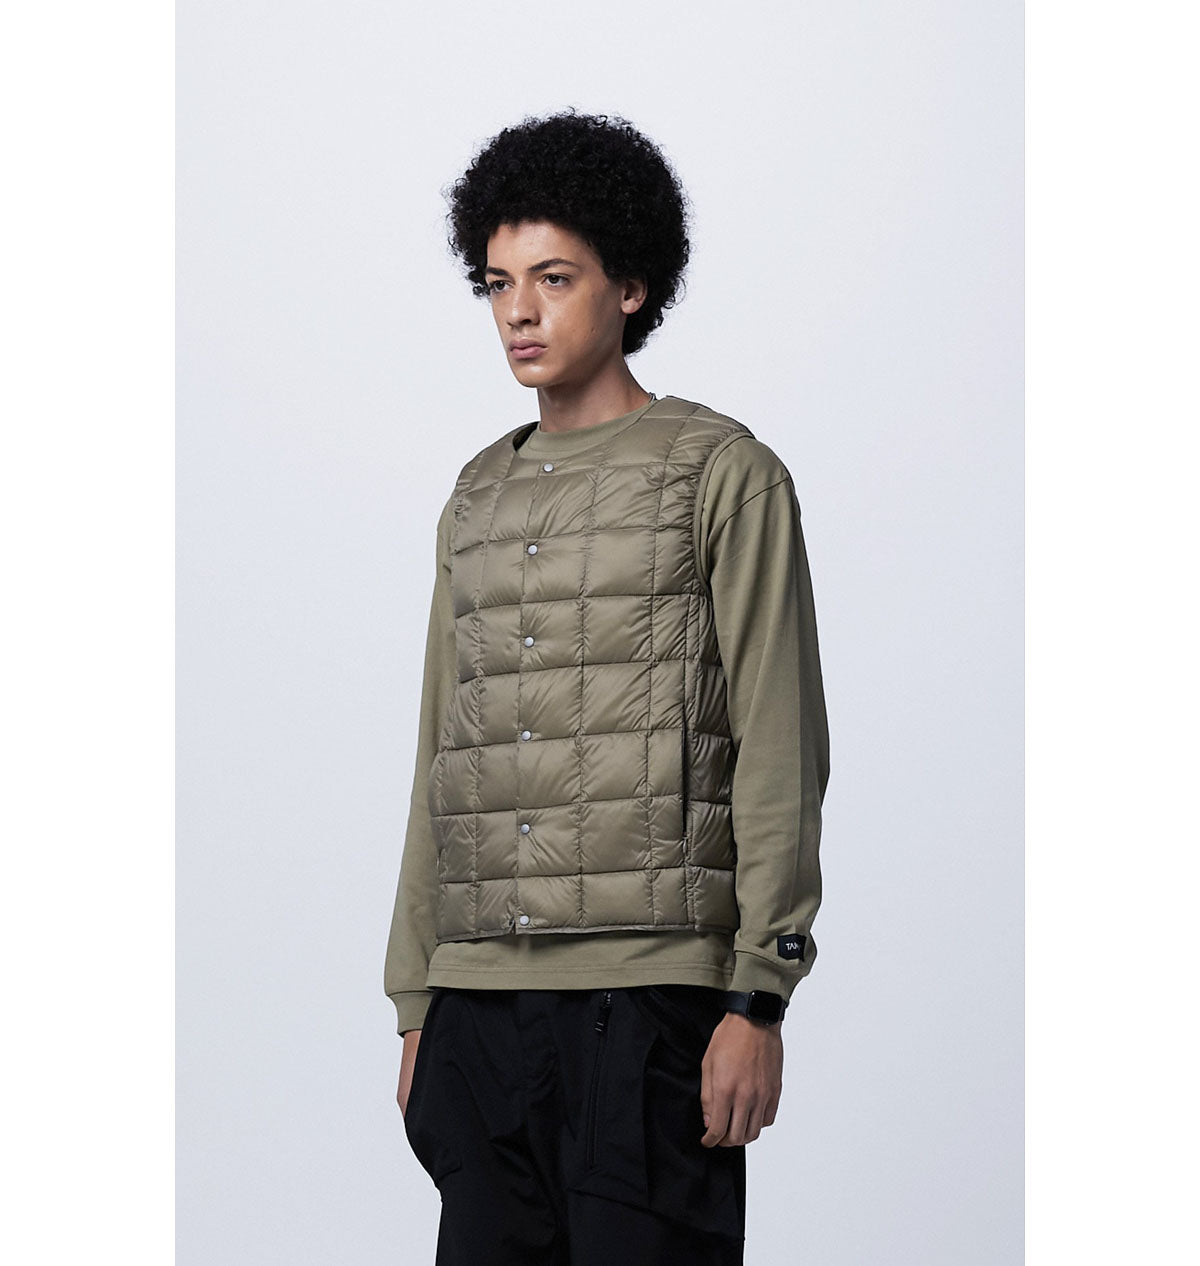 TAION Crew Neck Inner Down Vest 004 – unexpected store